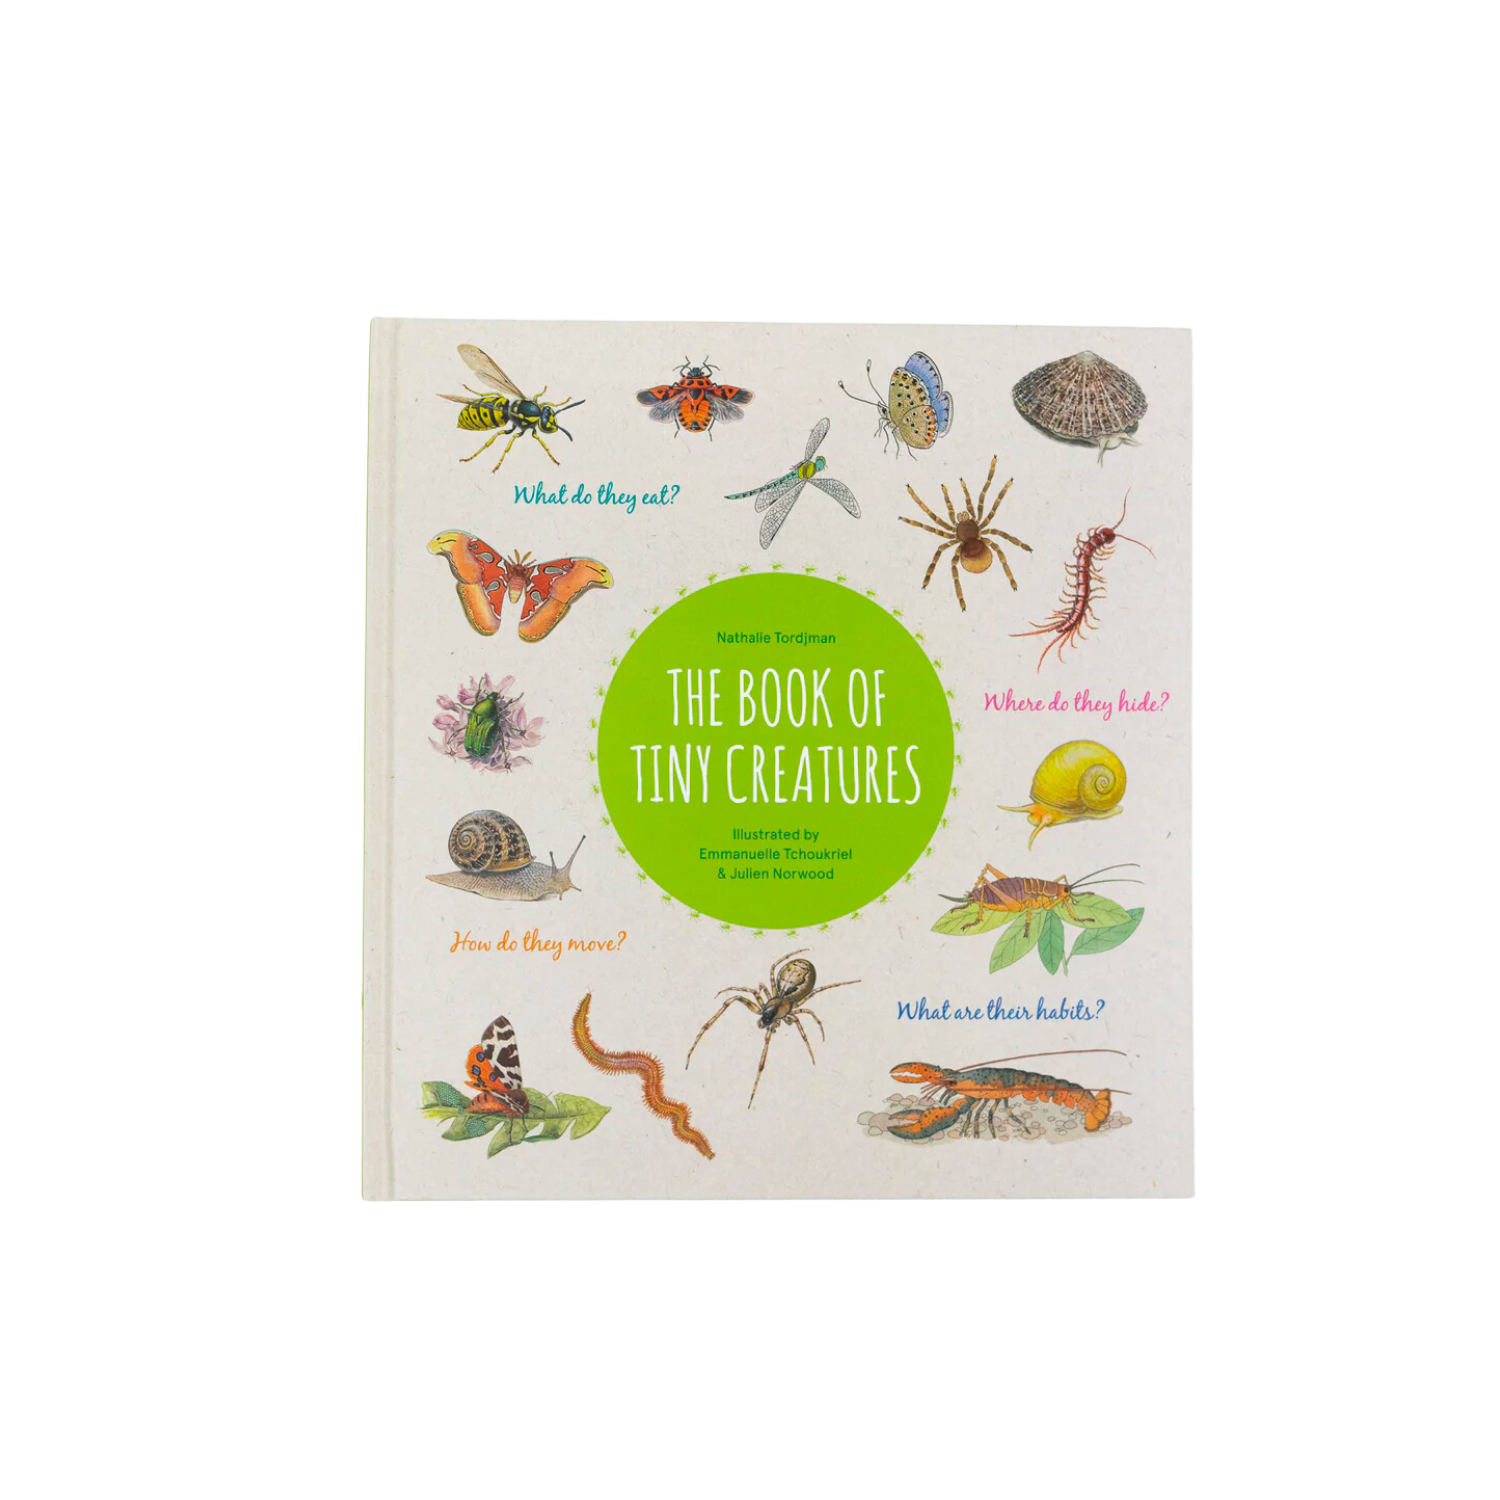 the book of tiny creatures by nathalie tordhman